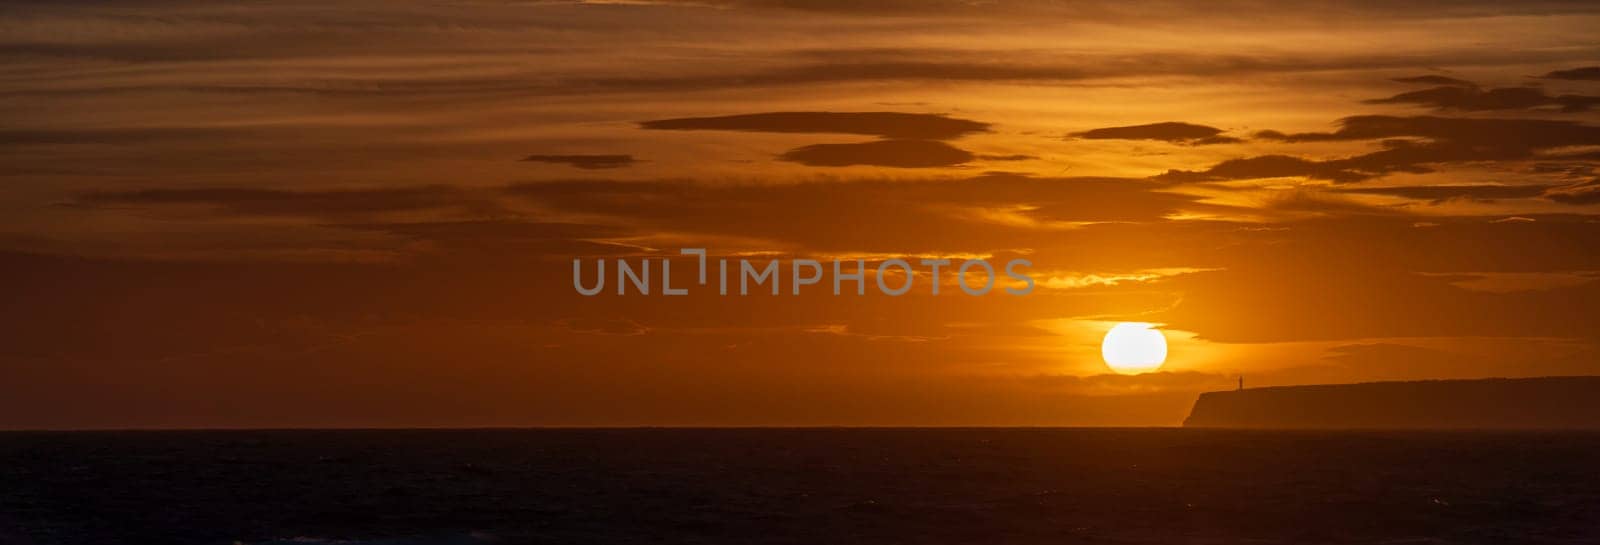 Lighthouse atop cliffs silhouetted by orange sunset over calm sea.